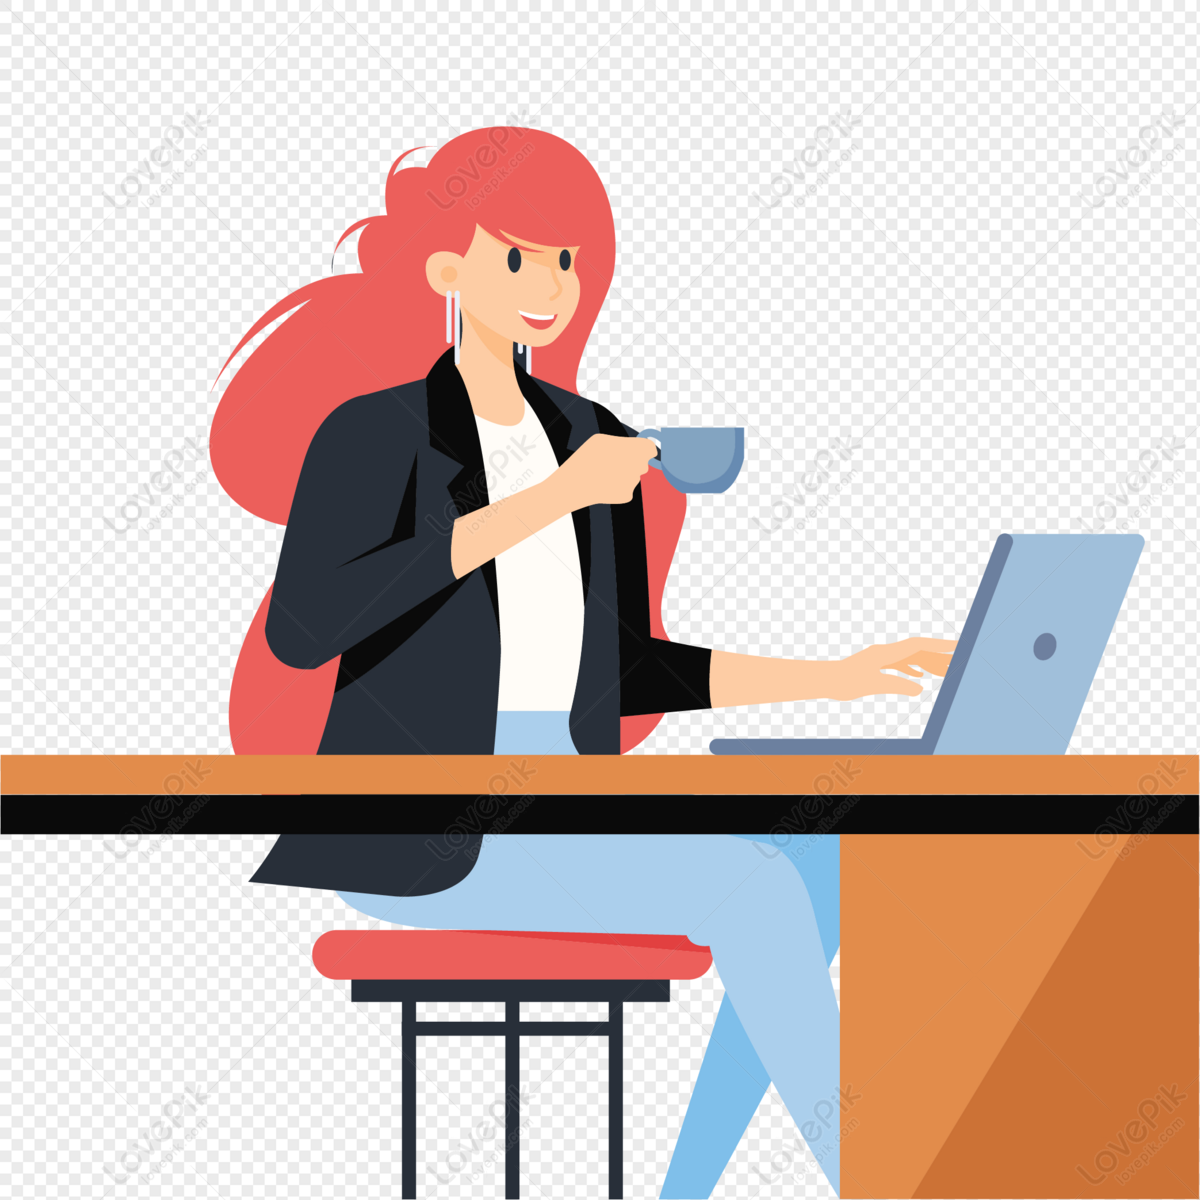 Female At Work PNG Image Free Download And Clipart Image For Free Download  - Lovepik | 401332671